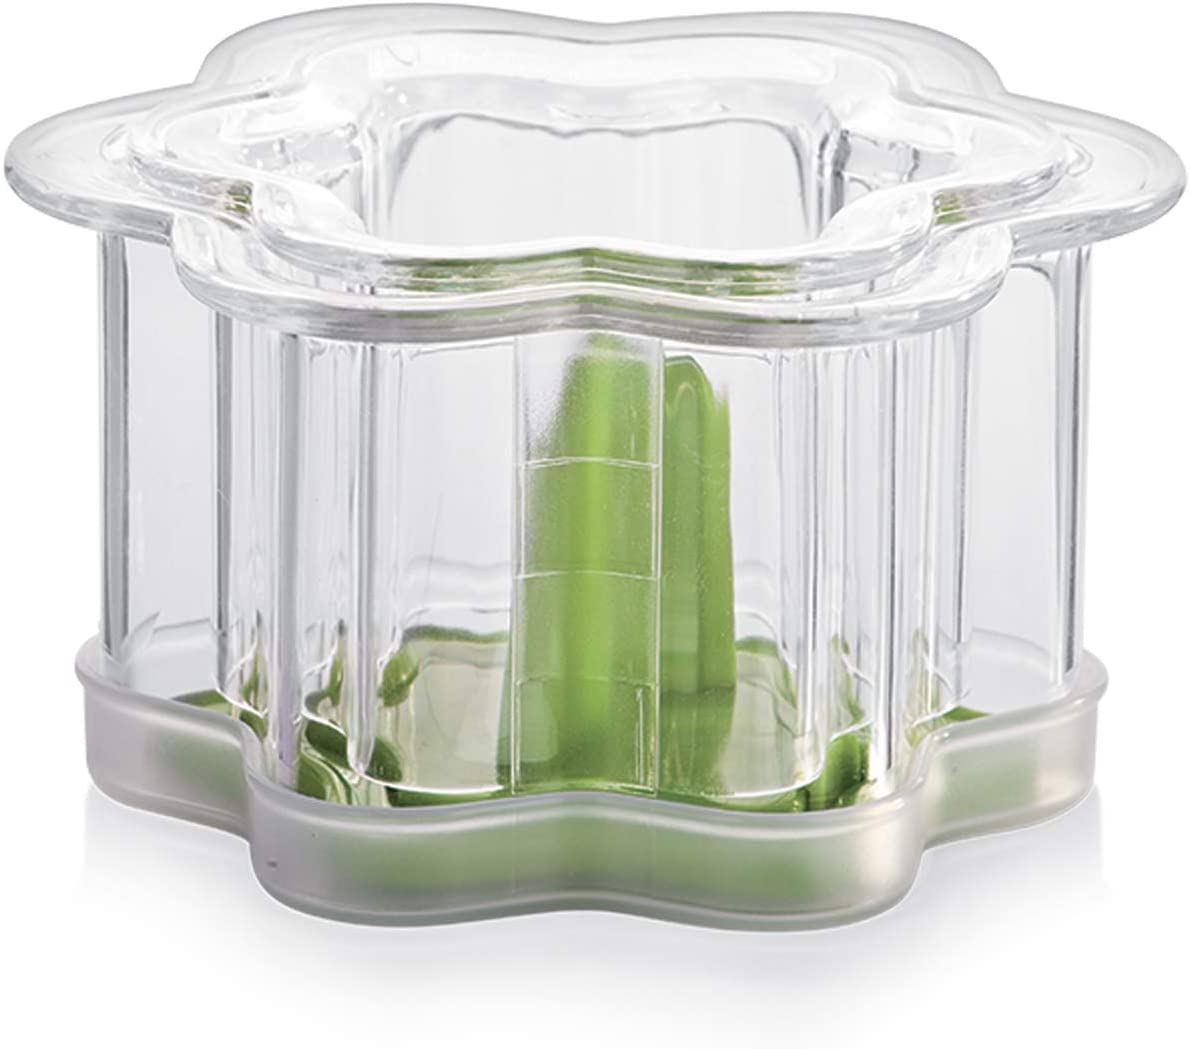 Tescoma Presto Cutters / Moulds, Flowers, Transparent / Green Plastic, 2 Items